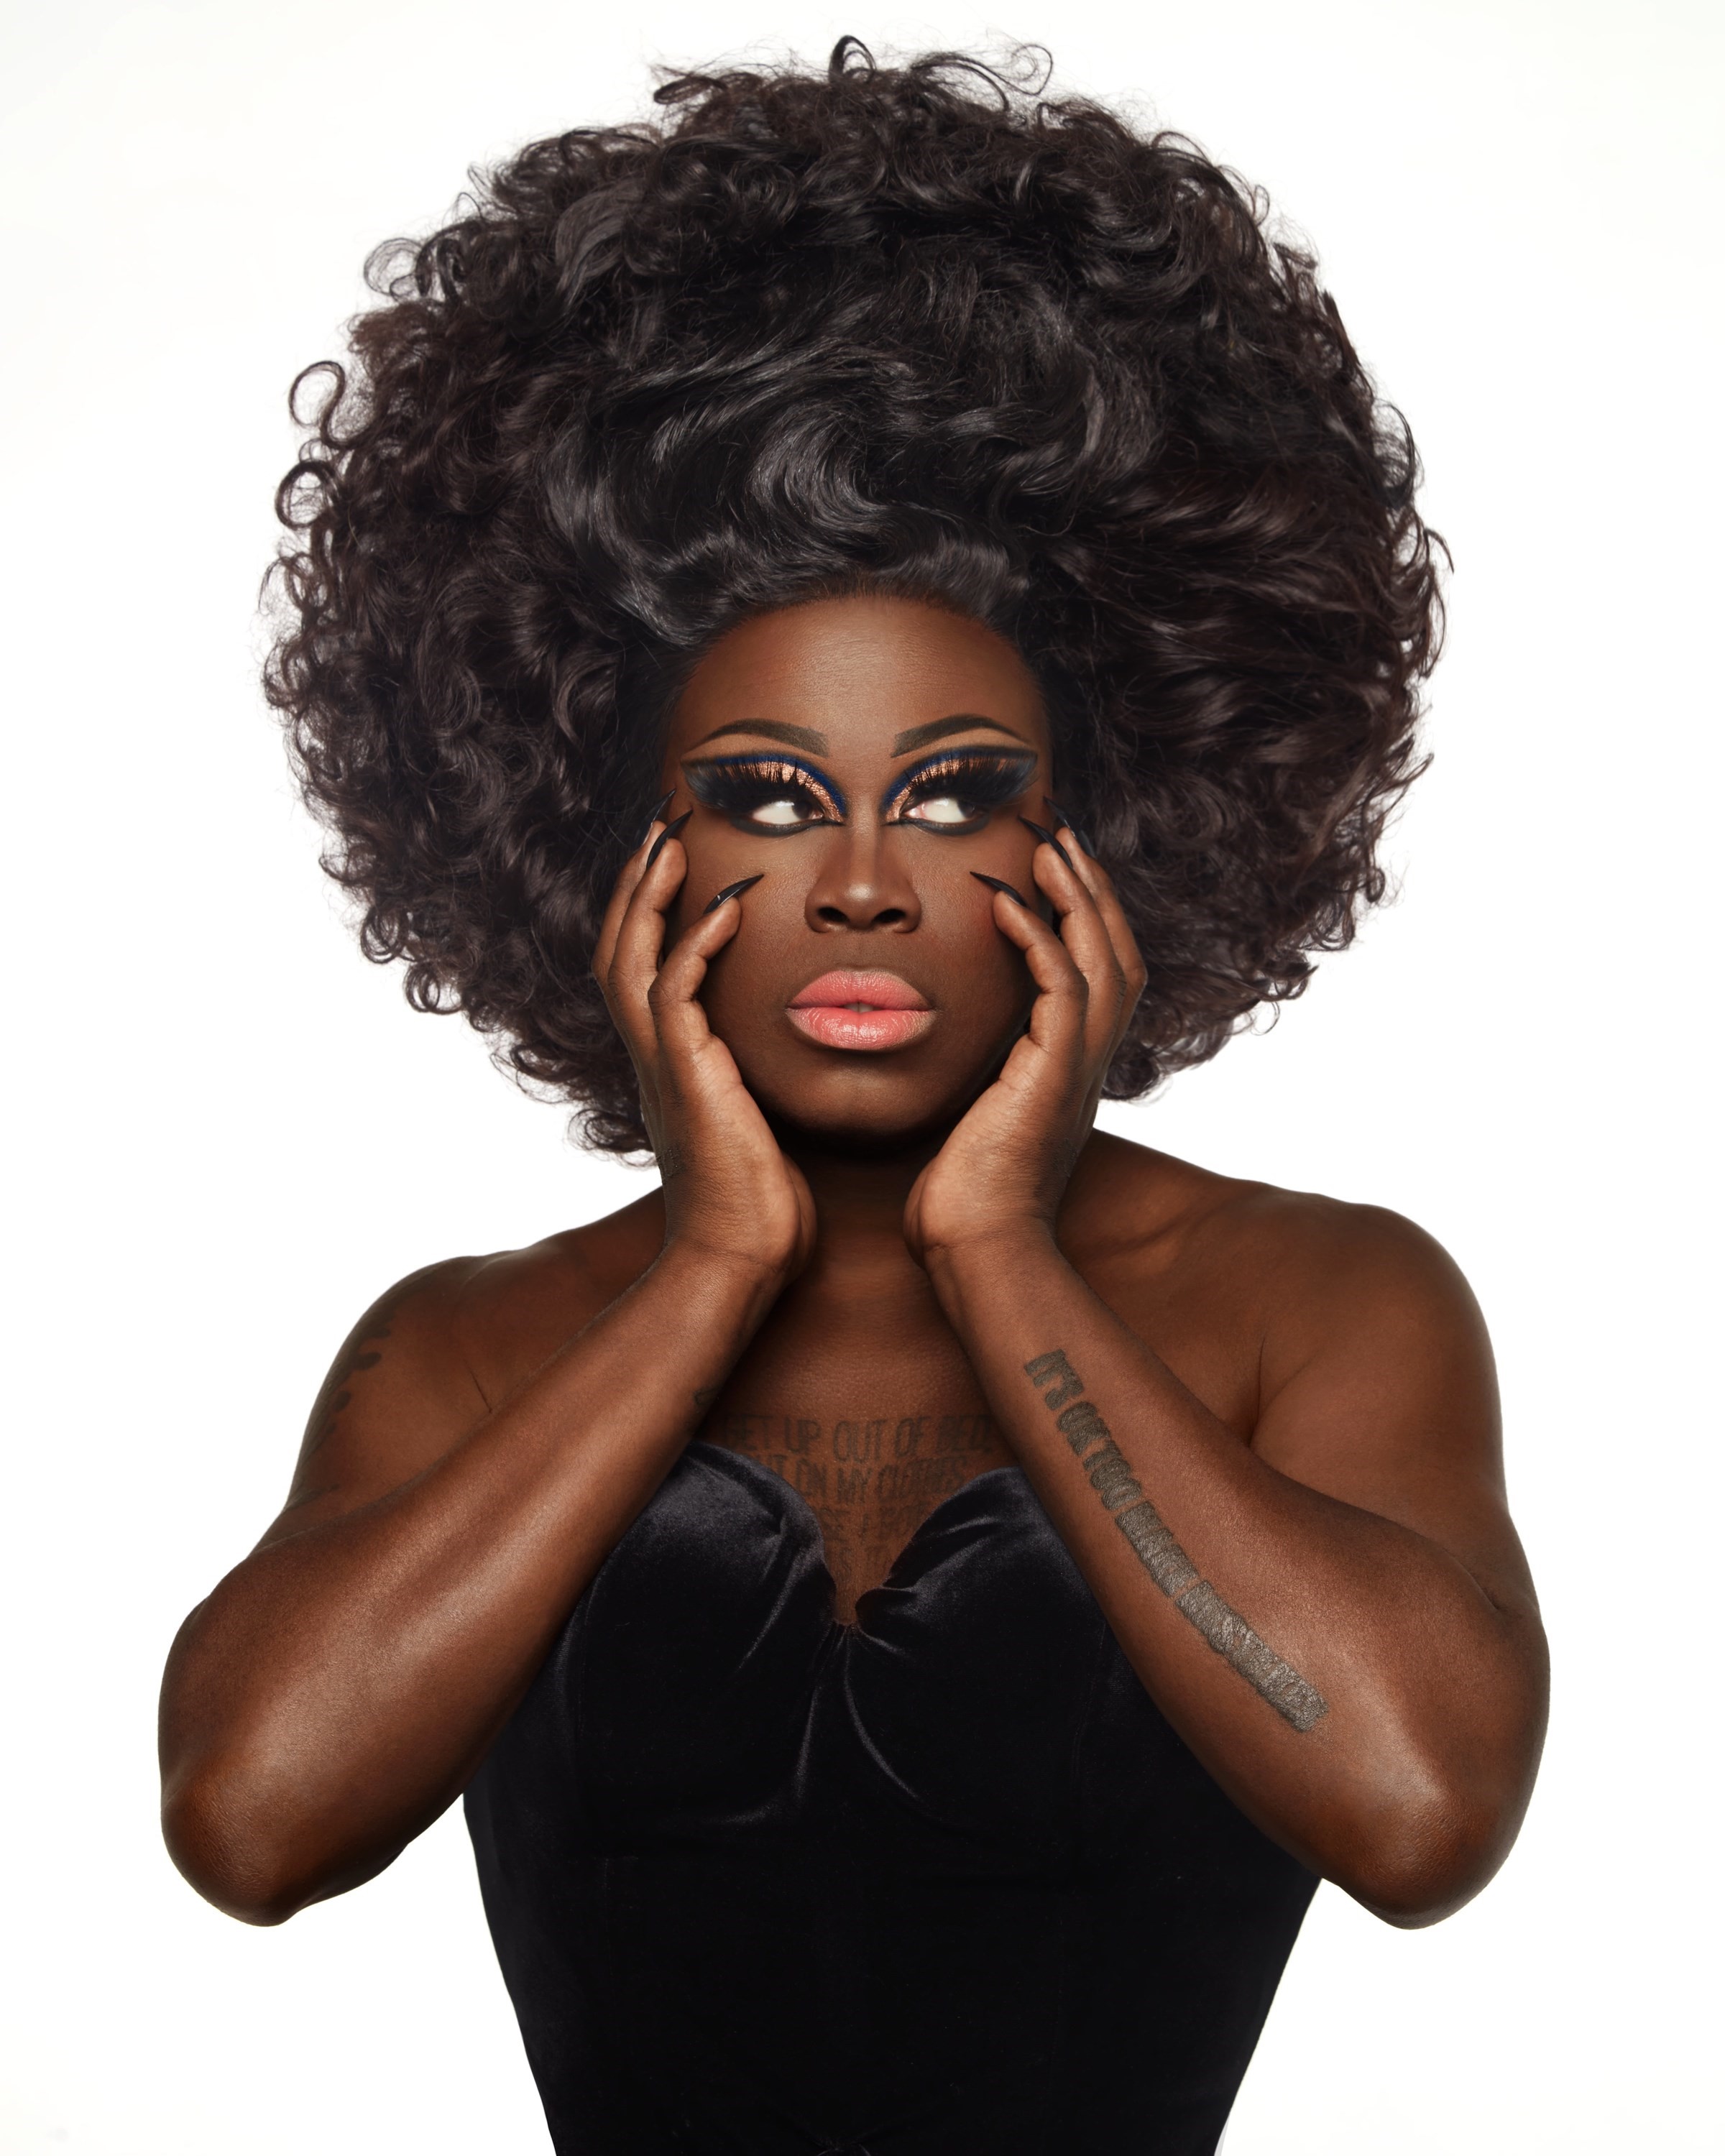 The Way Back: Counter-Culture on the Drag